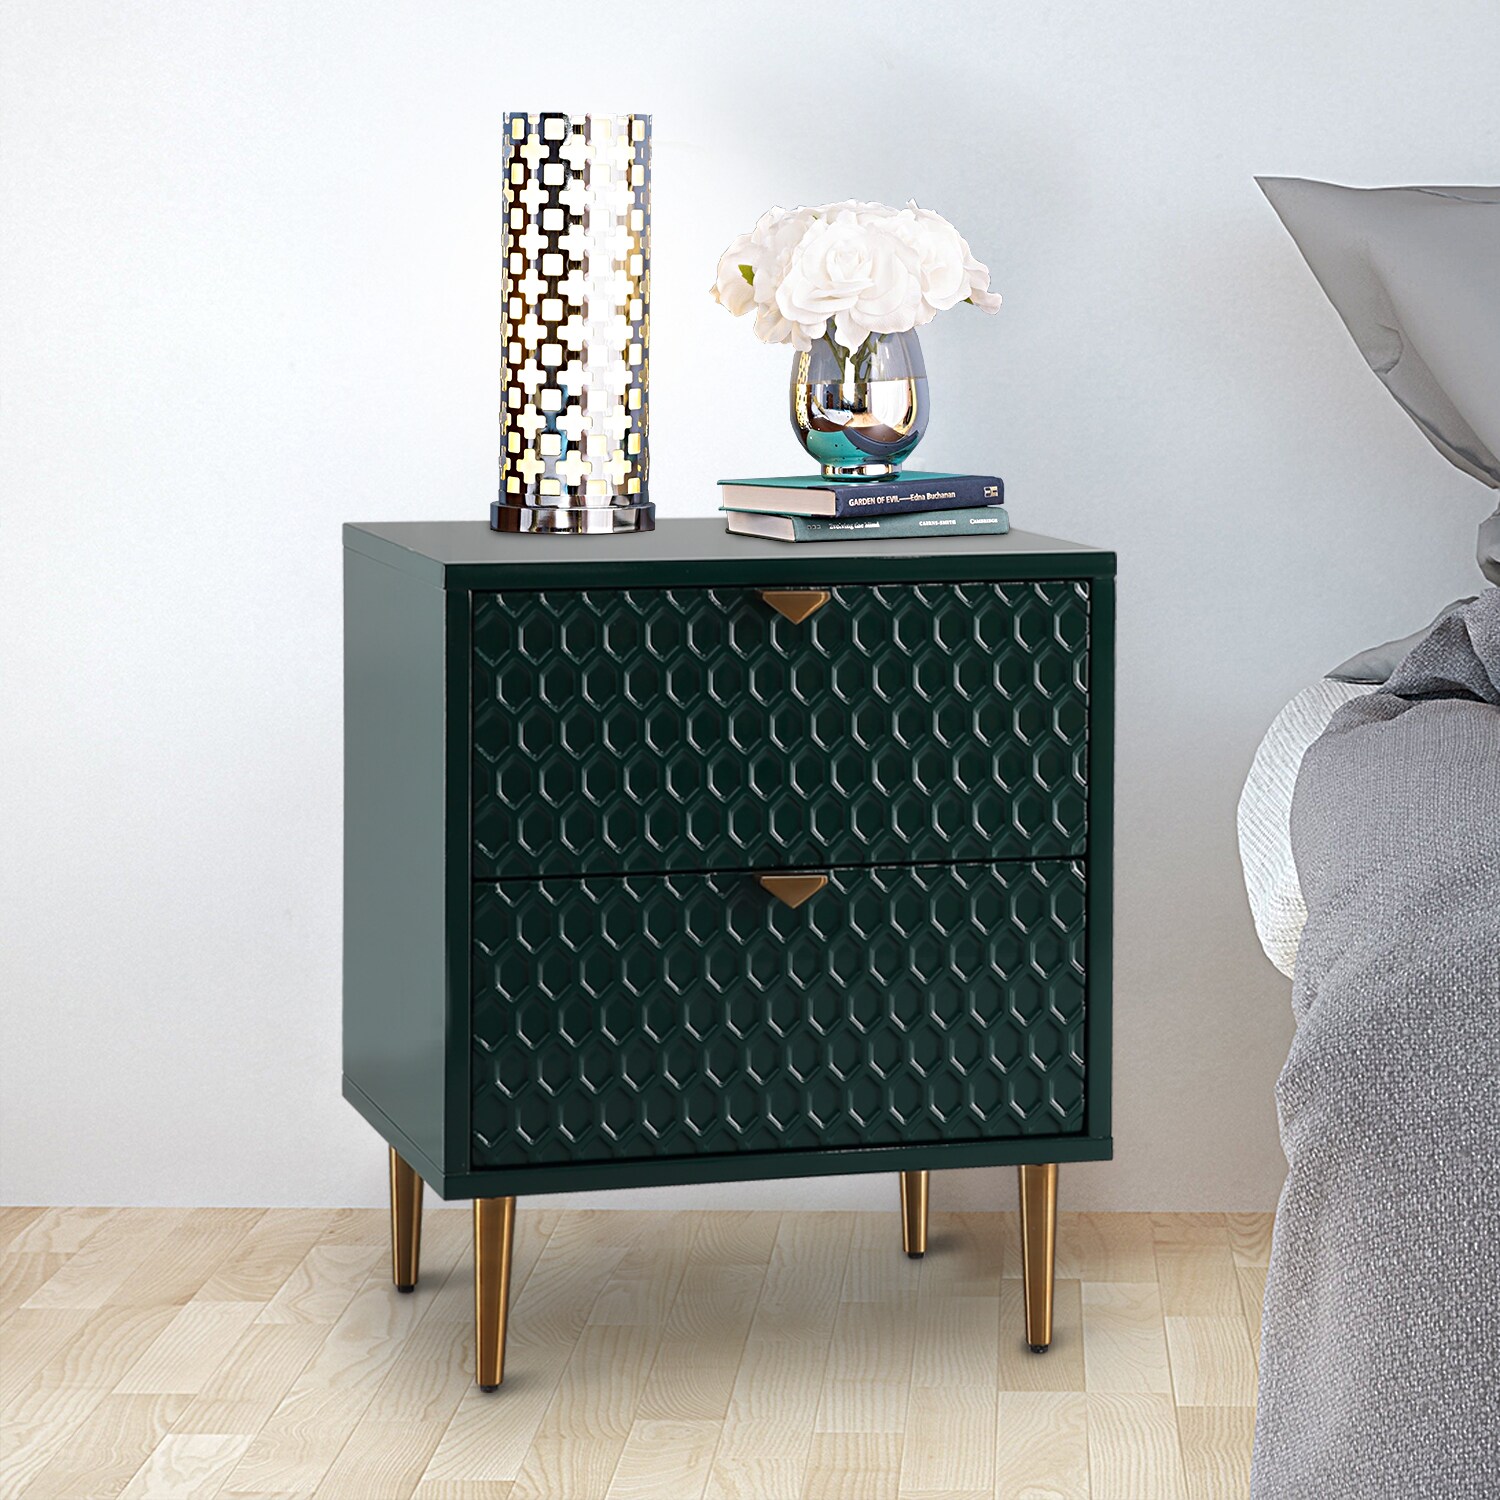 Narre Green End Table with Storage Living Room Side Table 2 Drawer & Open  Storage